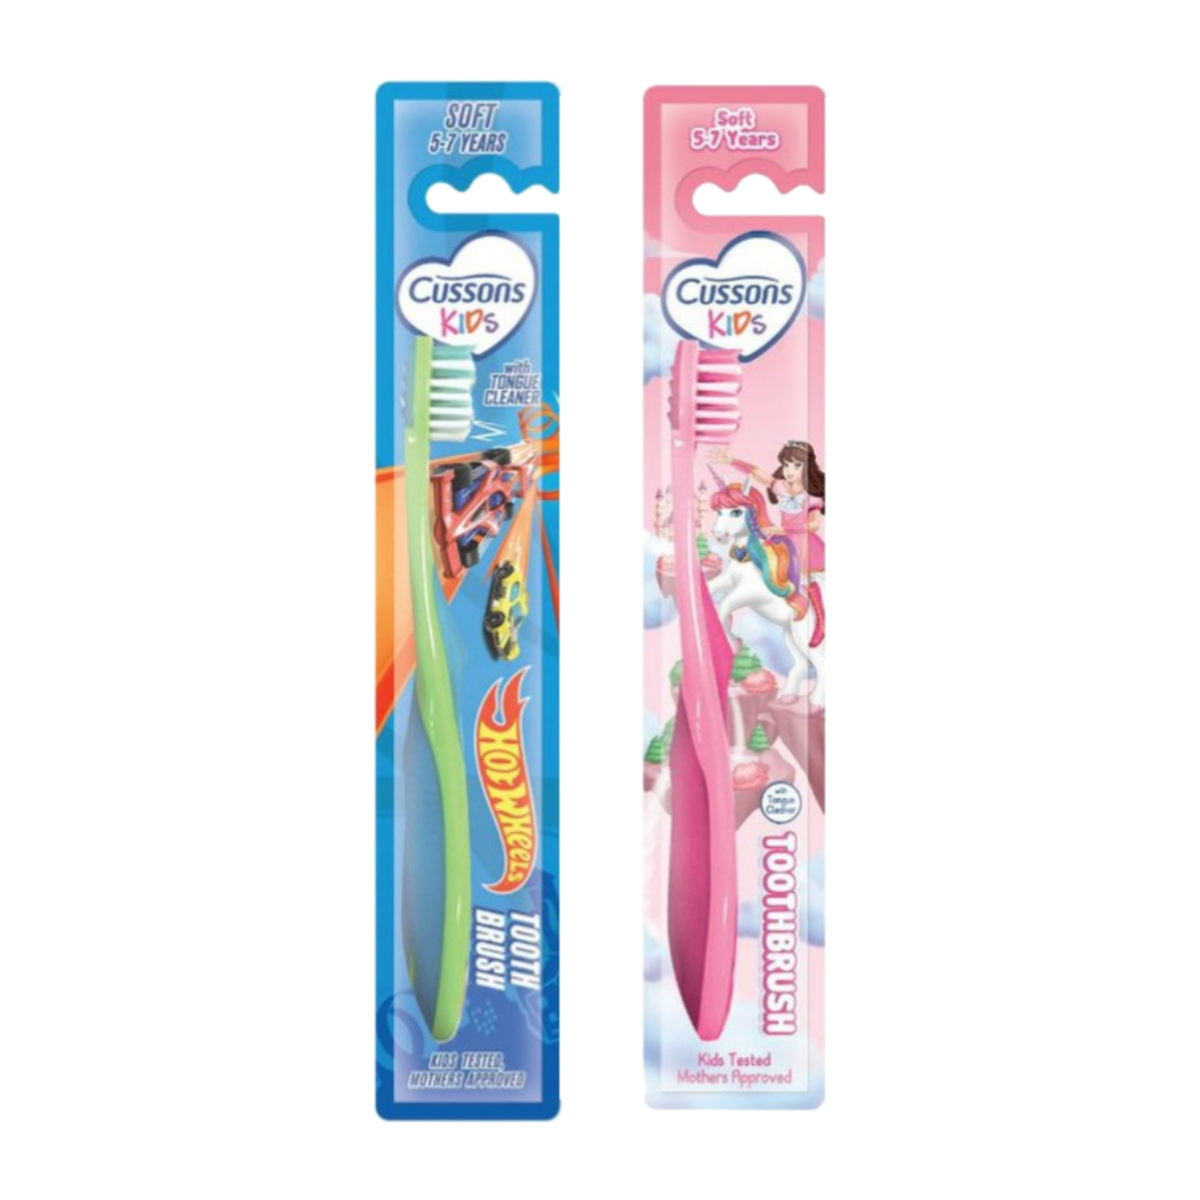 Cussons Kids Toothbrush